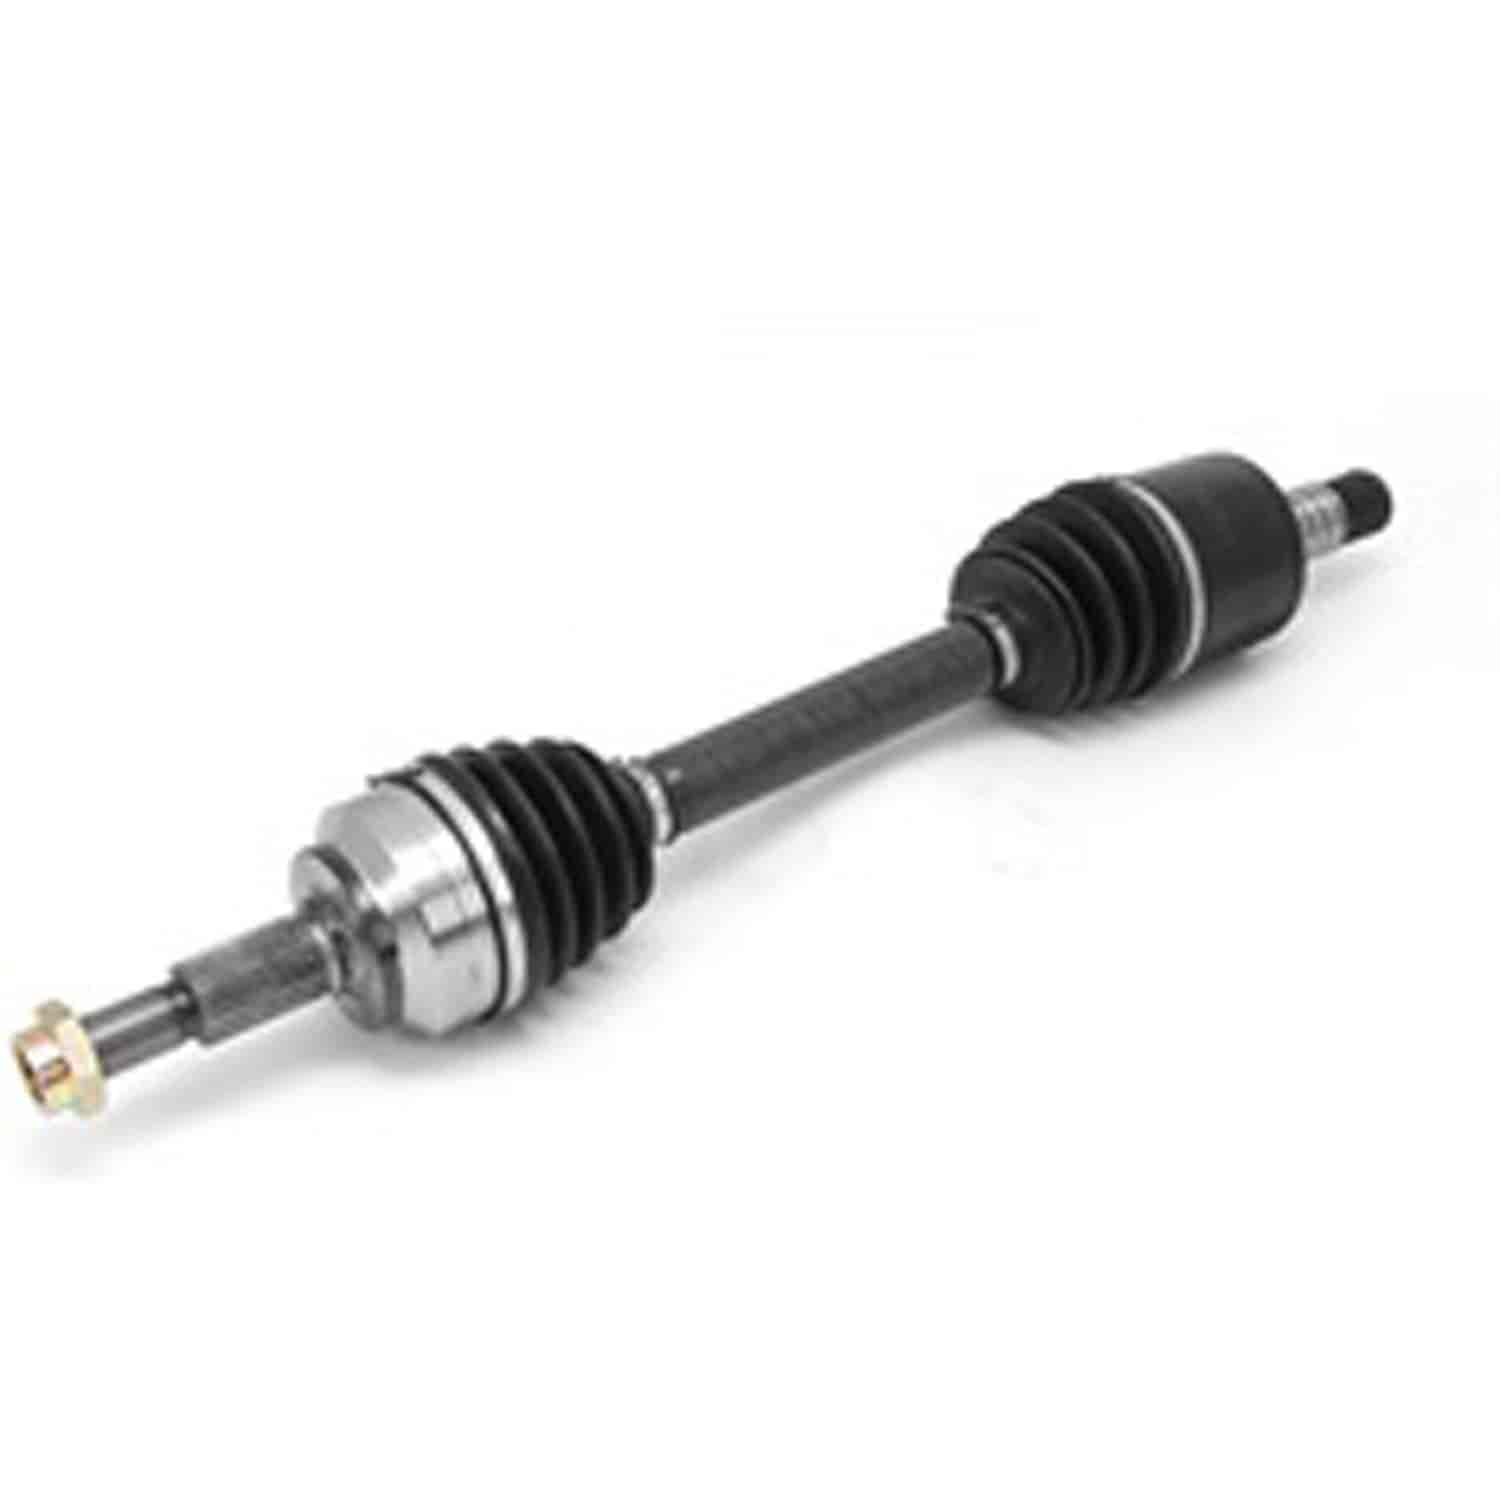 Replacement front CV axle shaft for Super d30 from Omix-ADA, Fits left side of 05-10 Jeep Gr